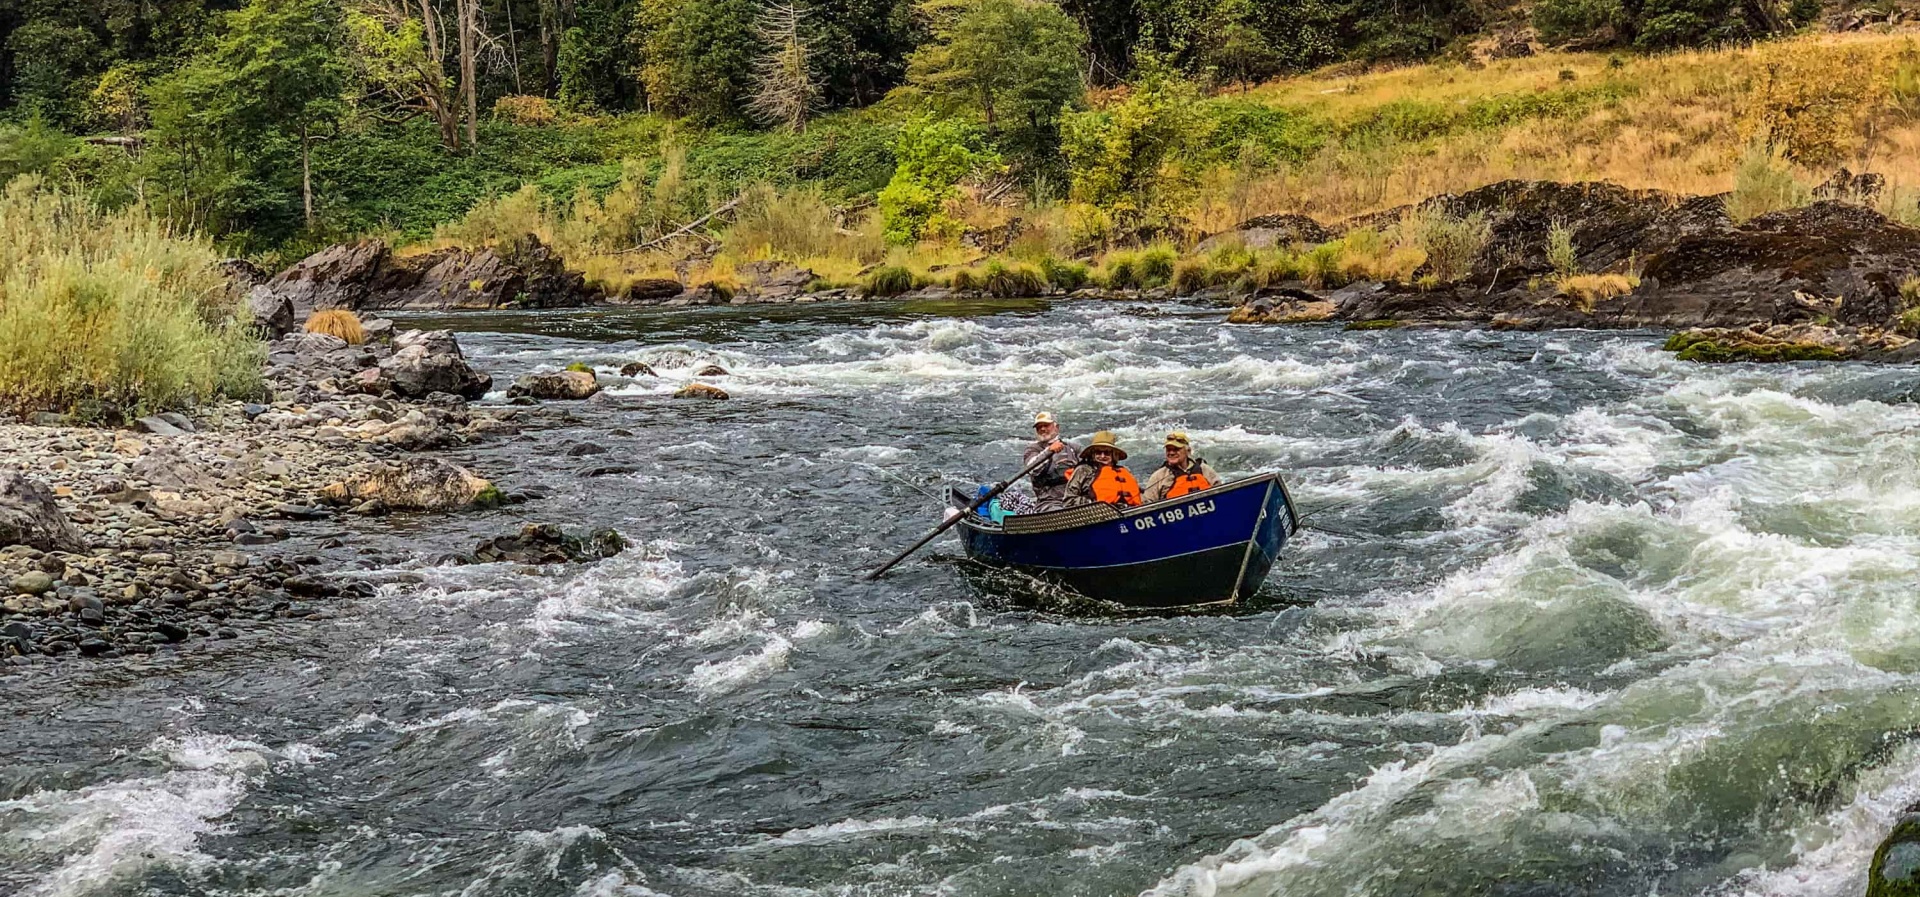 Rogue river drift boat at horse shoe bend rapid